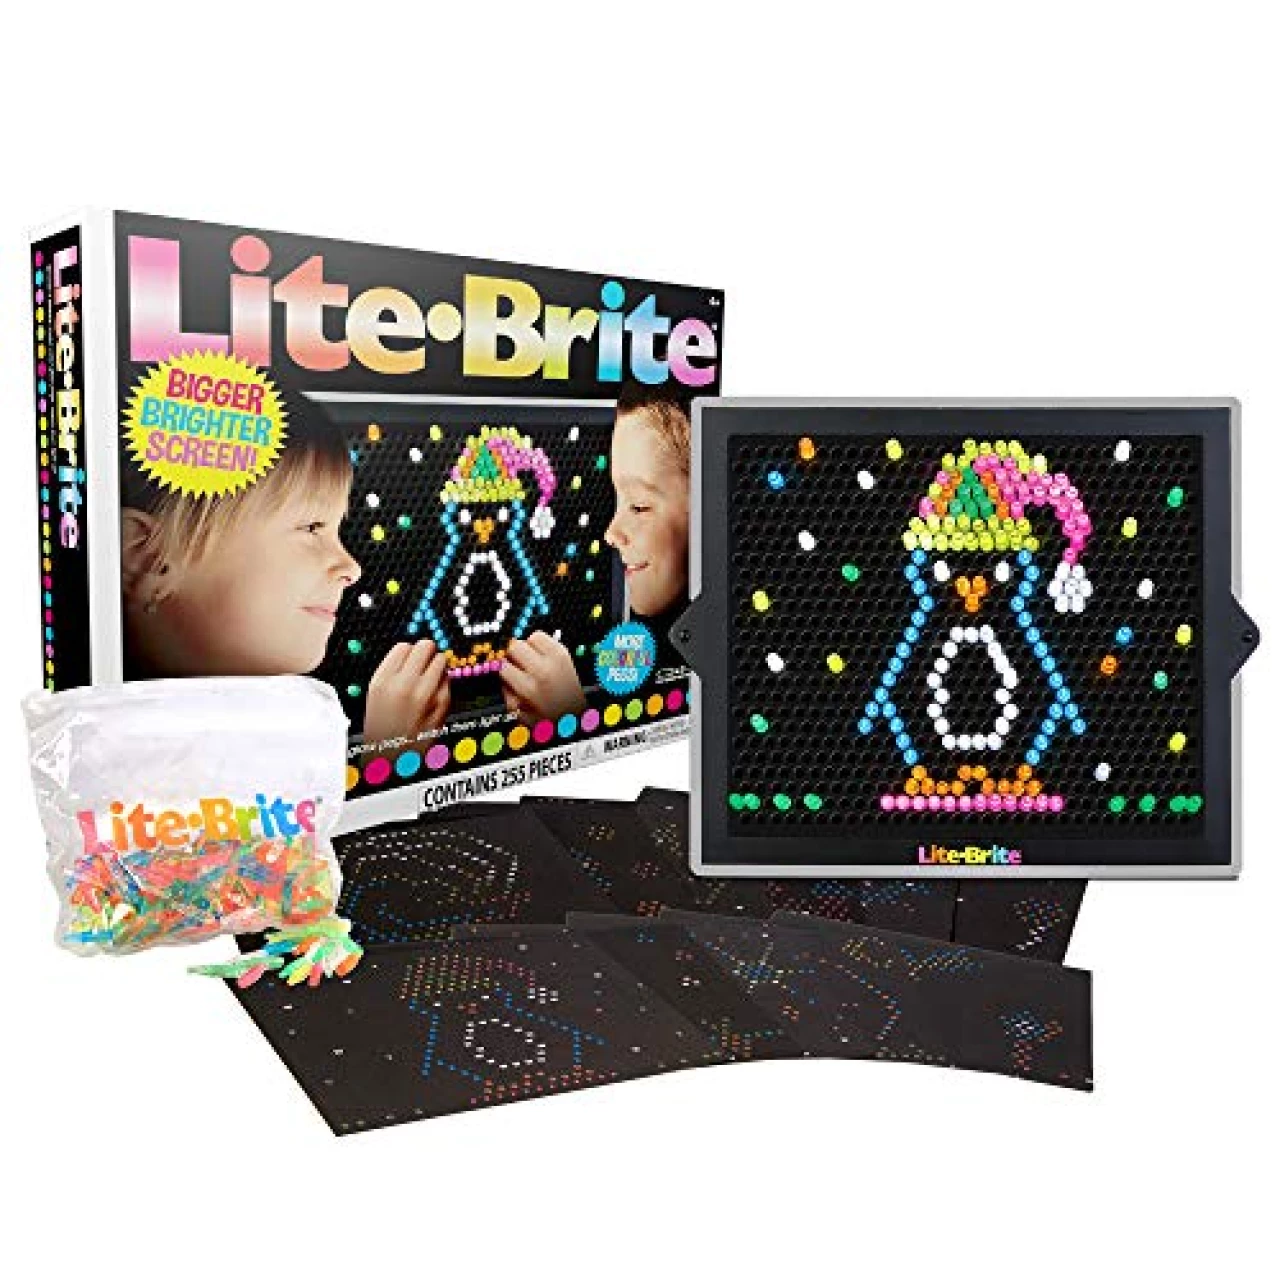 Lite-Brite Ultimate Value Retro Toy, 240 Pegs, 12 Seasonal Templates, Pouch, Gift for Girls and Boys, Ages 4-10, Amazon Exclusive